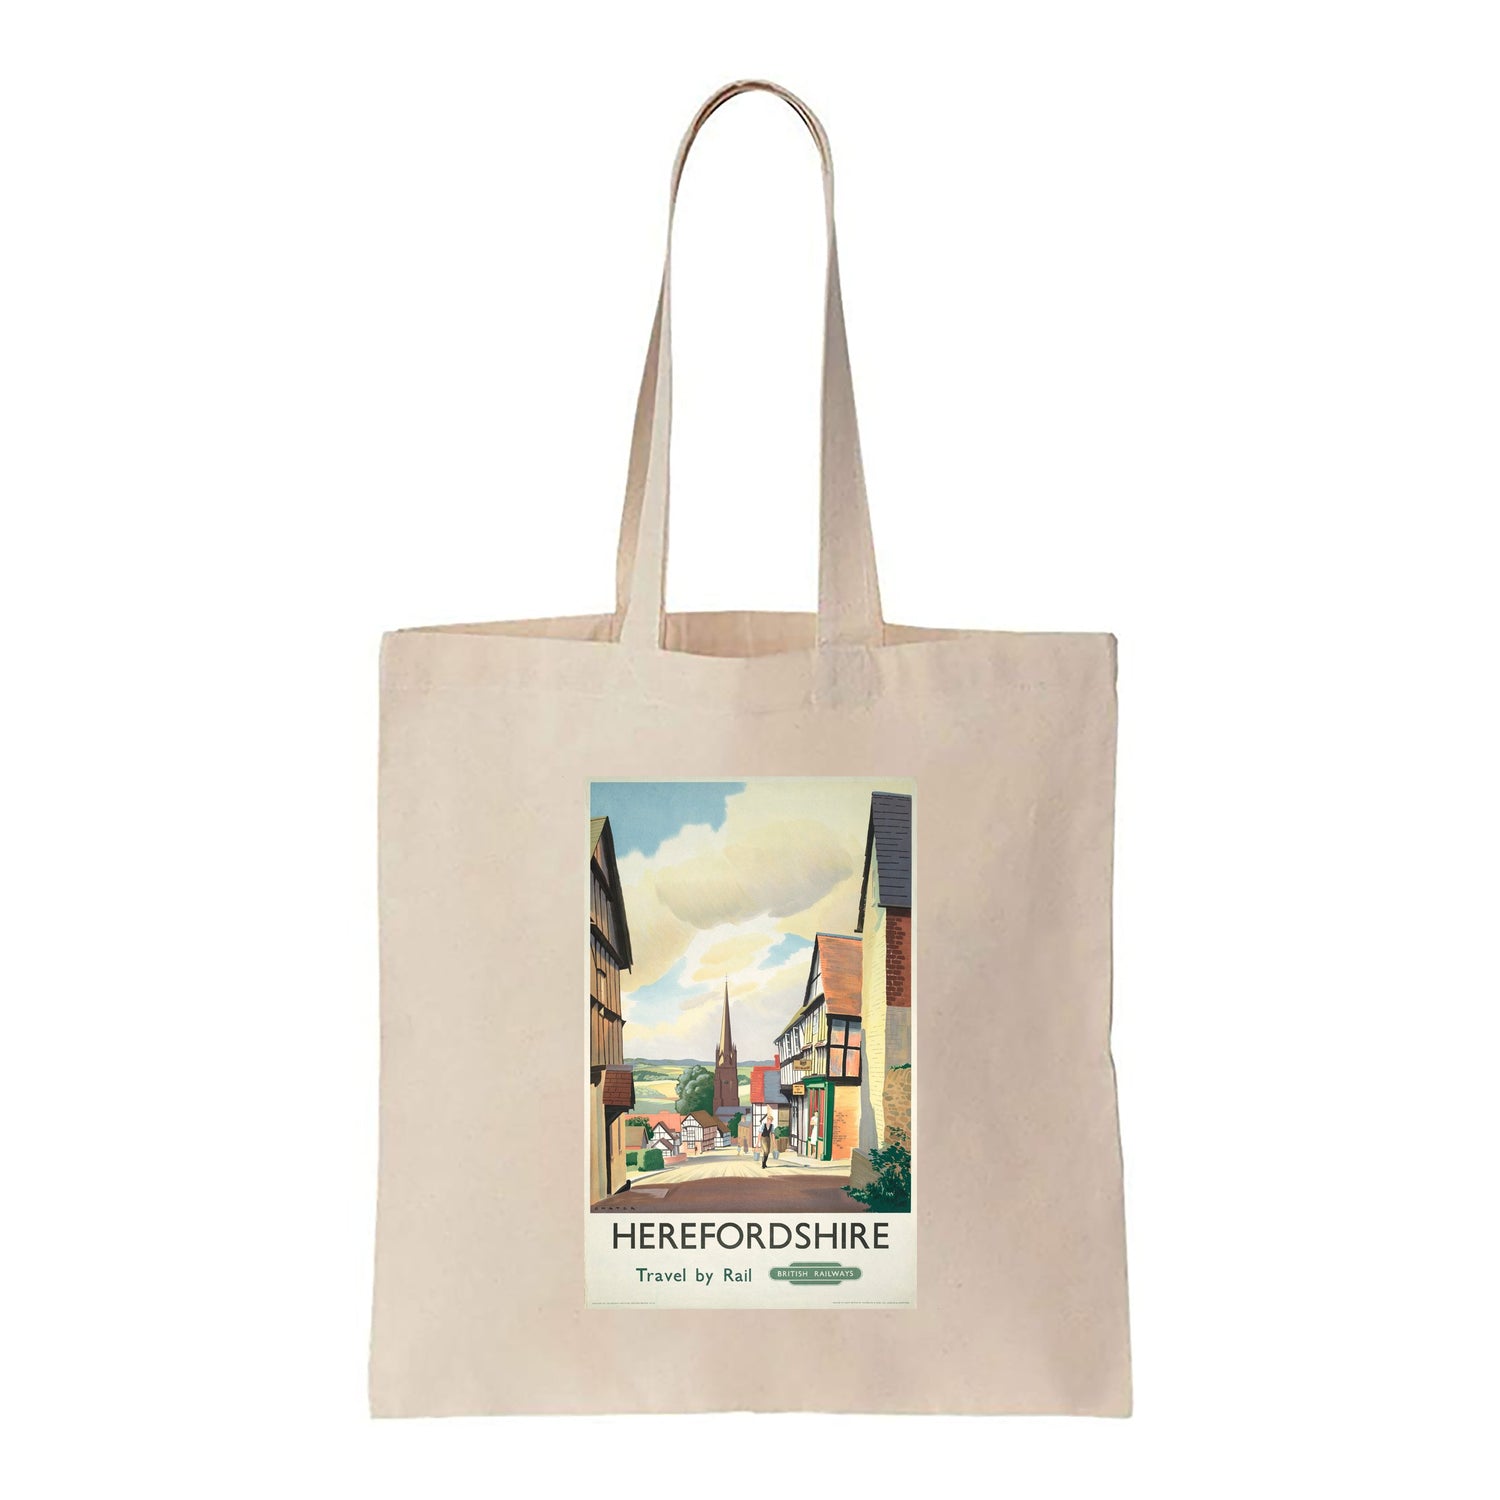 Herefordshire - Travel by Rail - Canvas Tote Bag